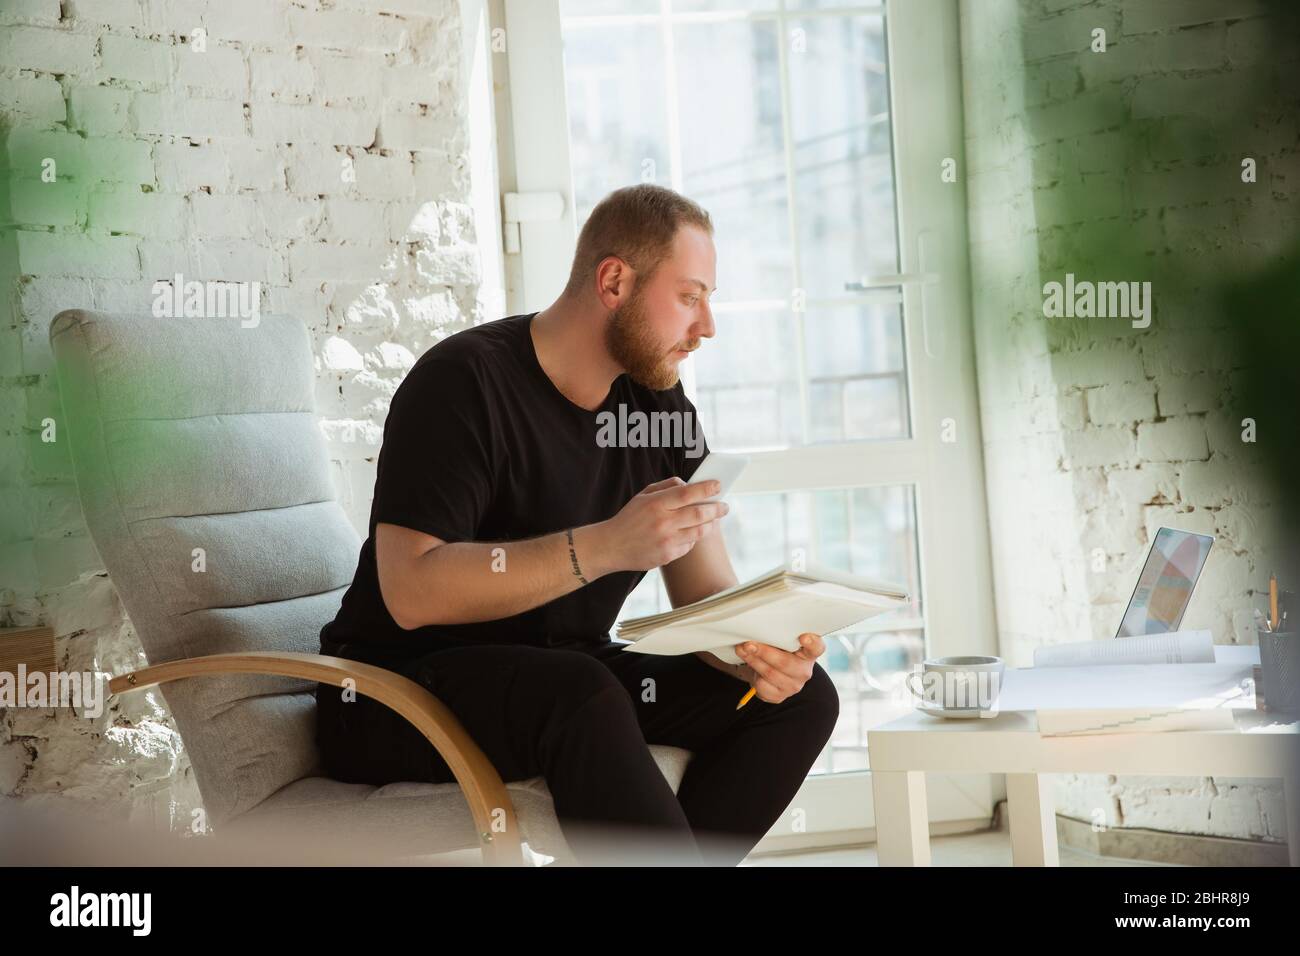 Young man studying at home during online courses for managers, marketers, buyers. Getting profession while isolated, quarantine against coronavirus spreading. Using laptop, smartphone, devices. Stock Photo